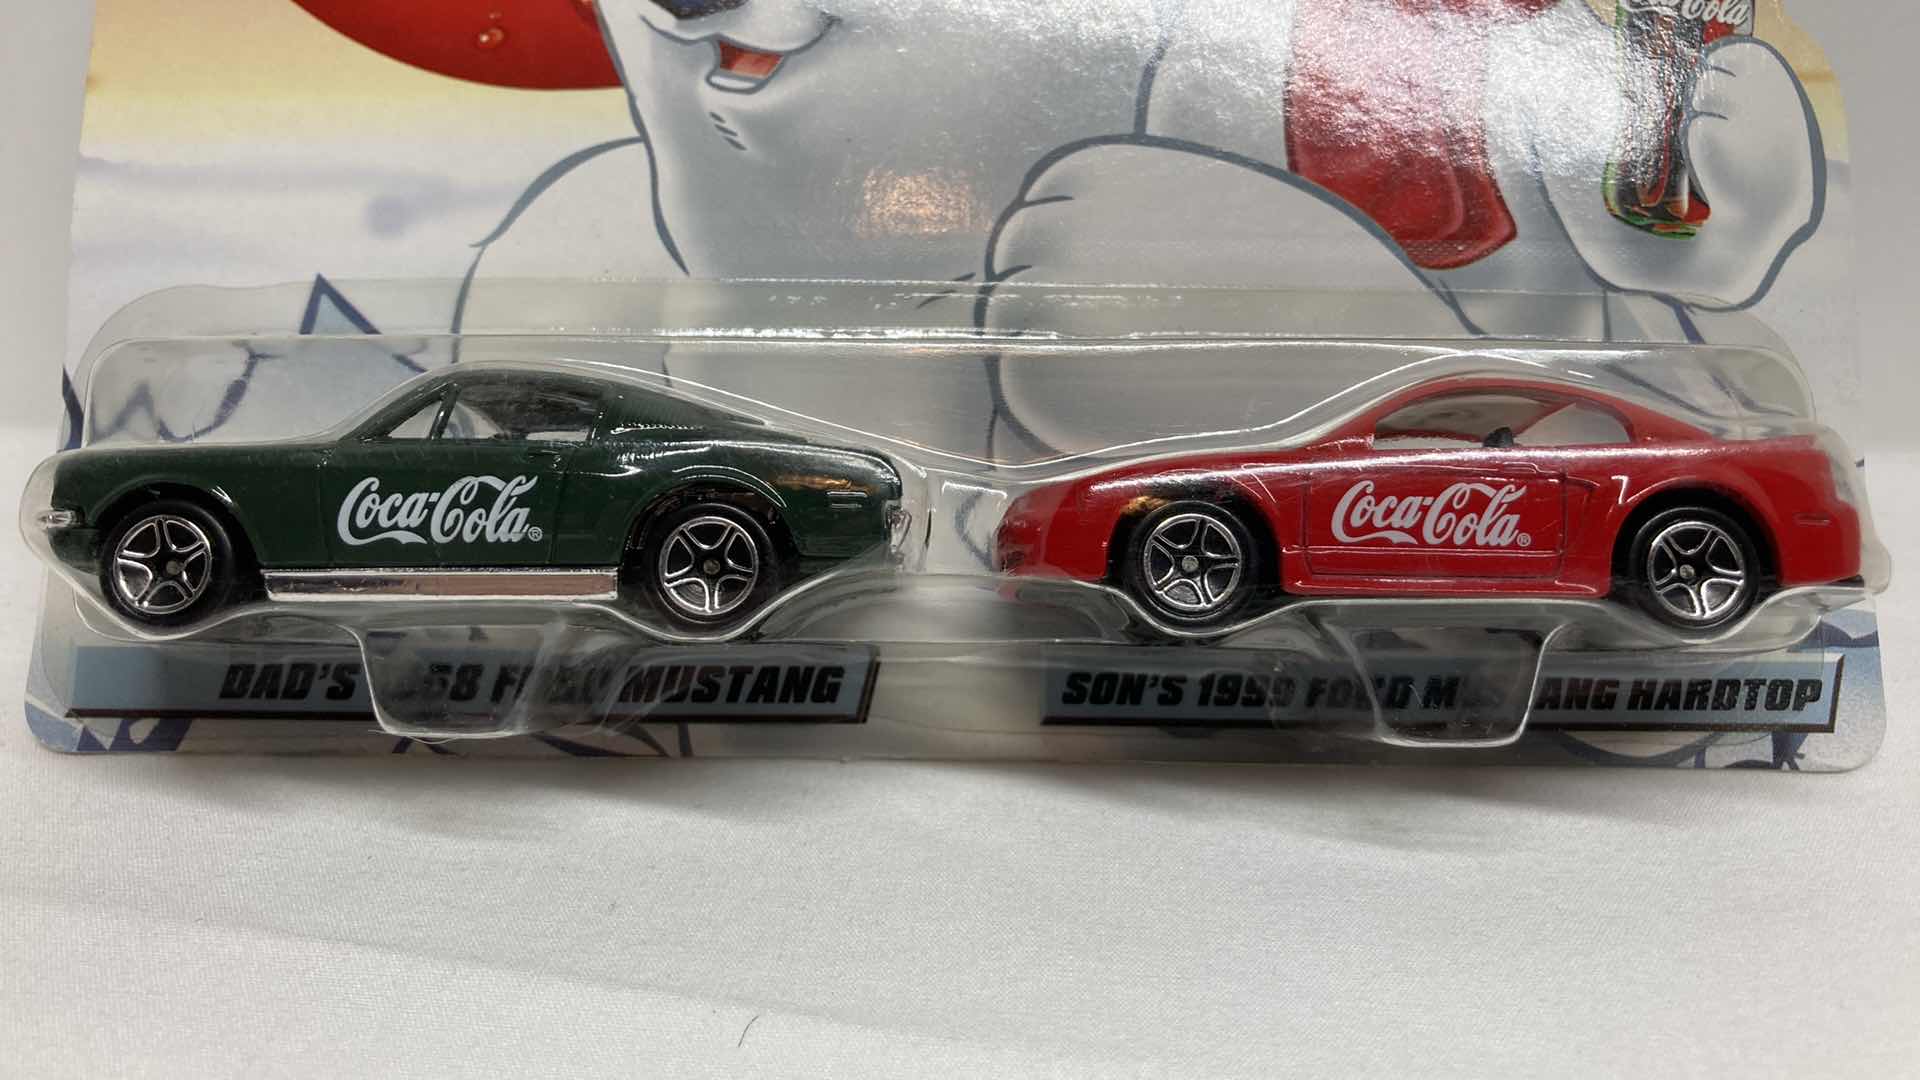 Photo 5 of MATCHBOX COCA-COLA DADS 1968 FORD MUSTANG & SONS 1999 FORD MUSTANG HARDTOP CARS